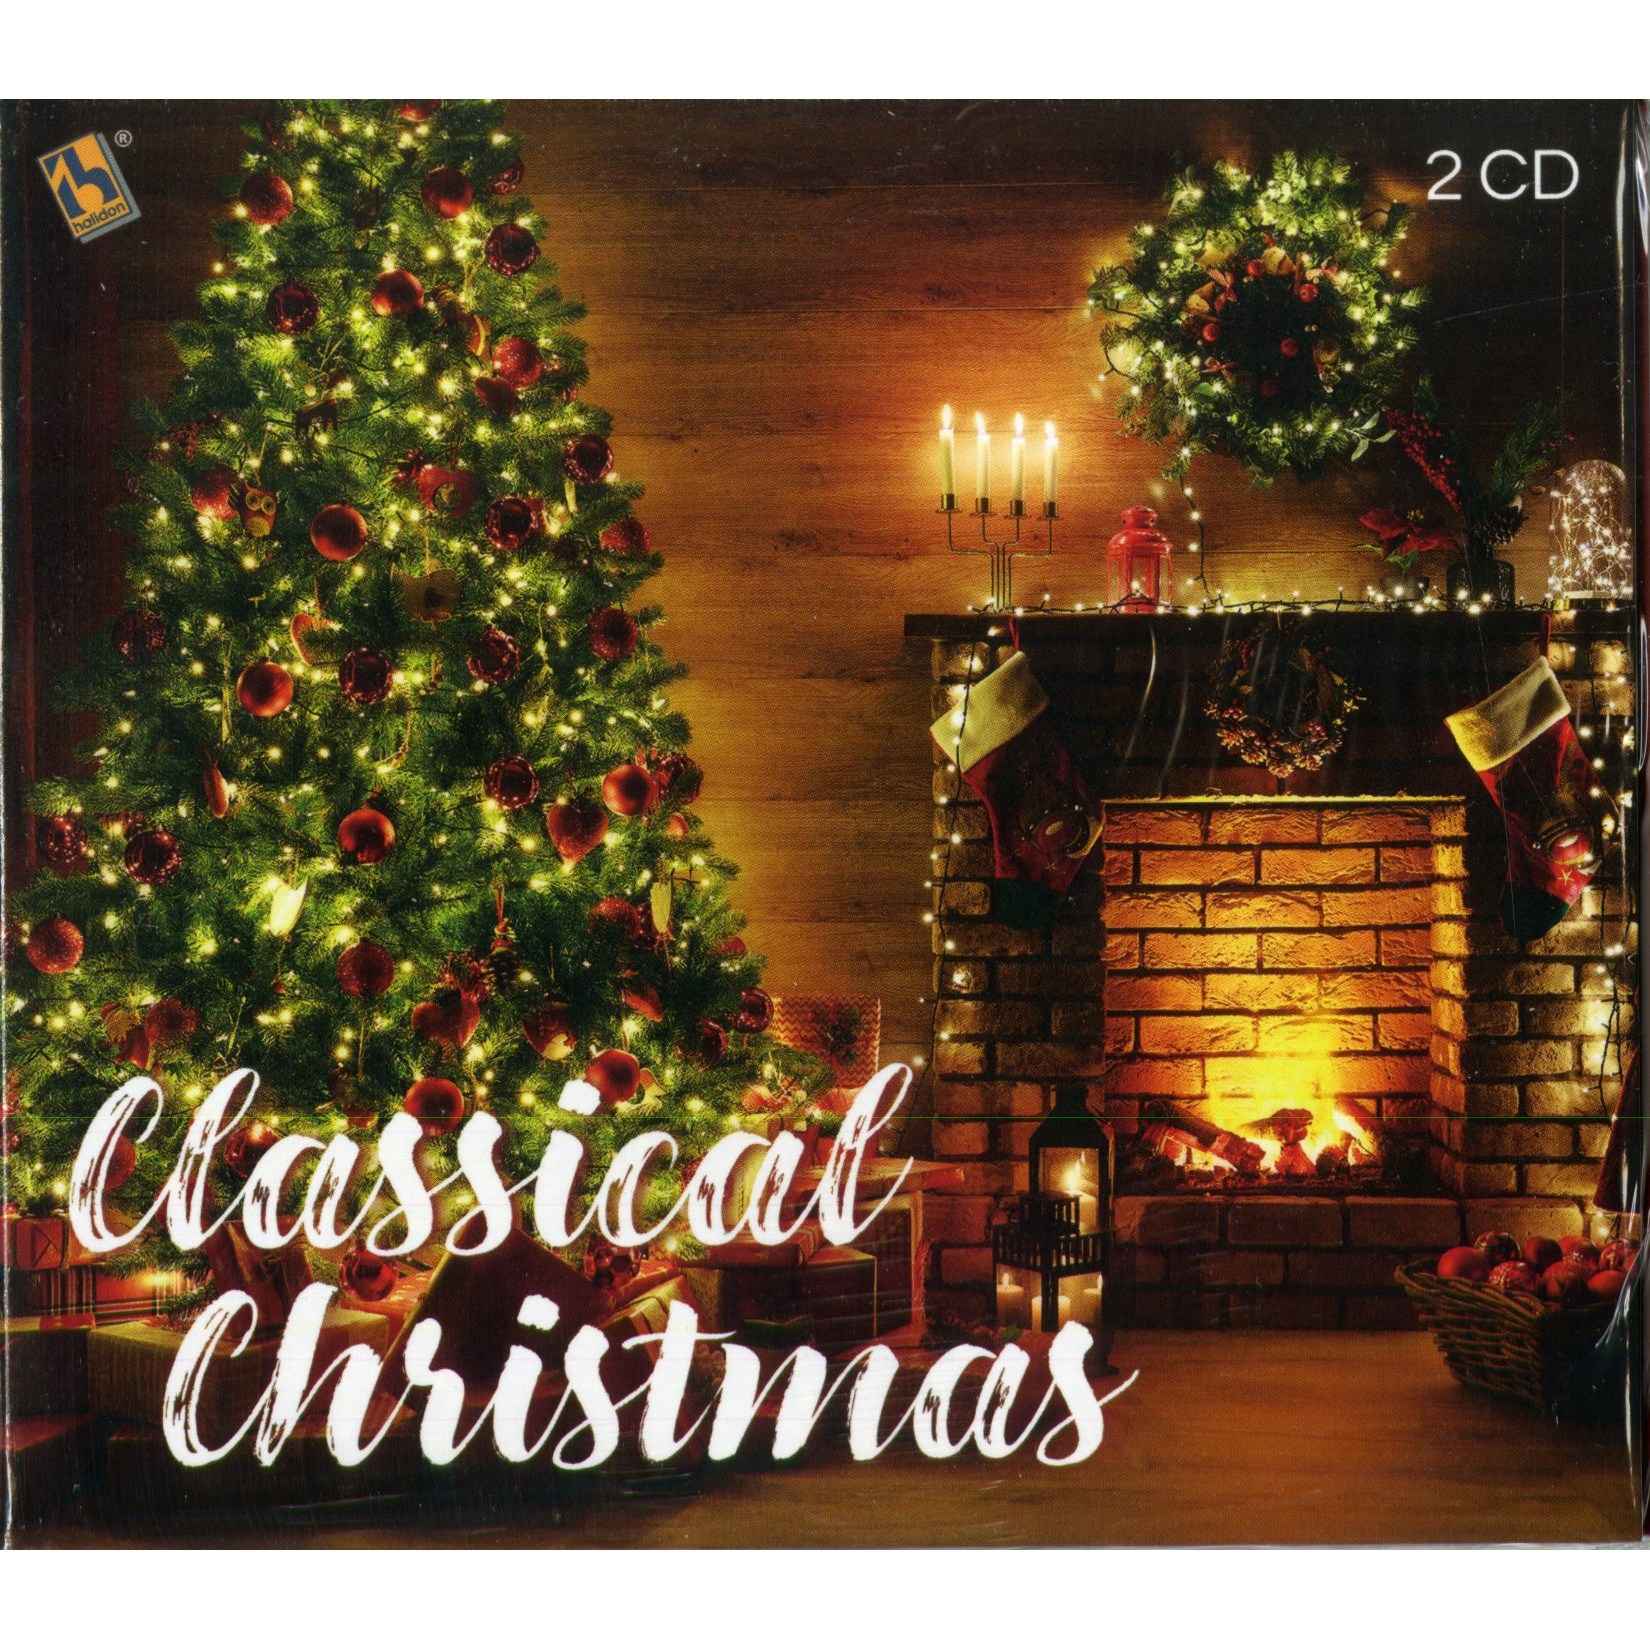 CLASSICAL CHRISTMAS - RED VINYL